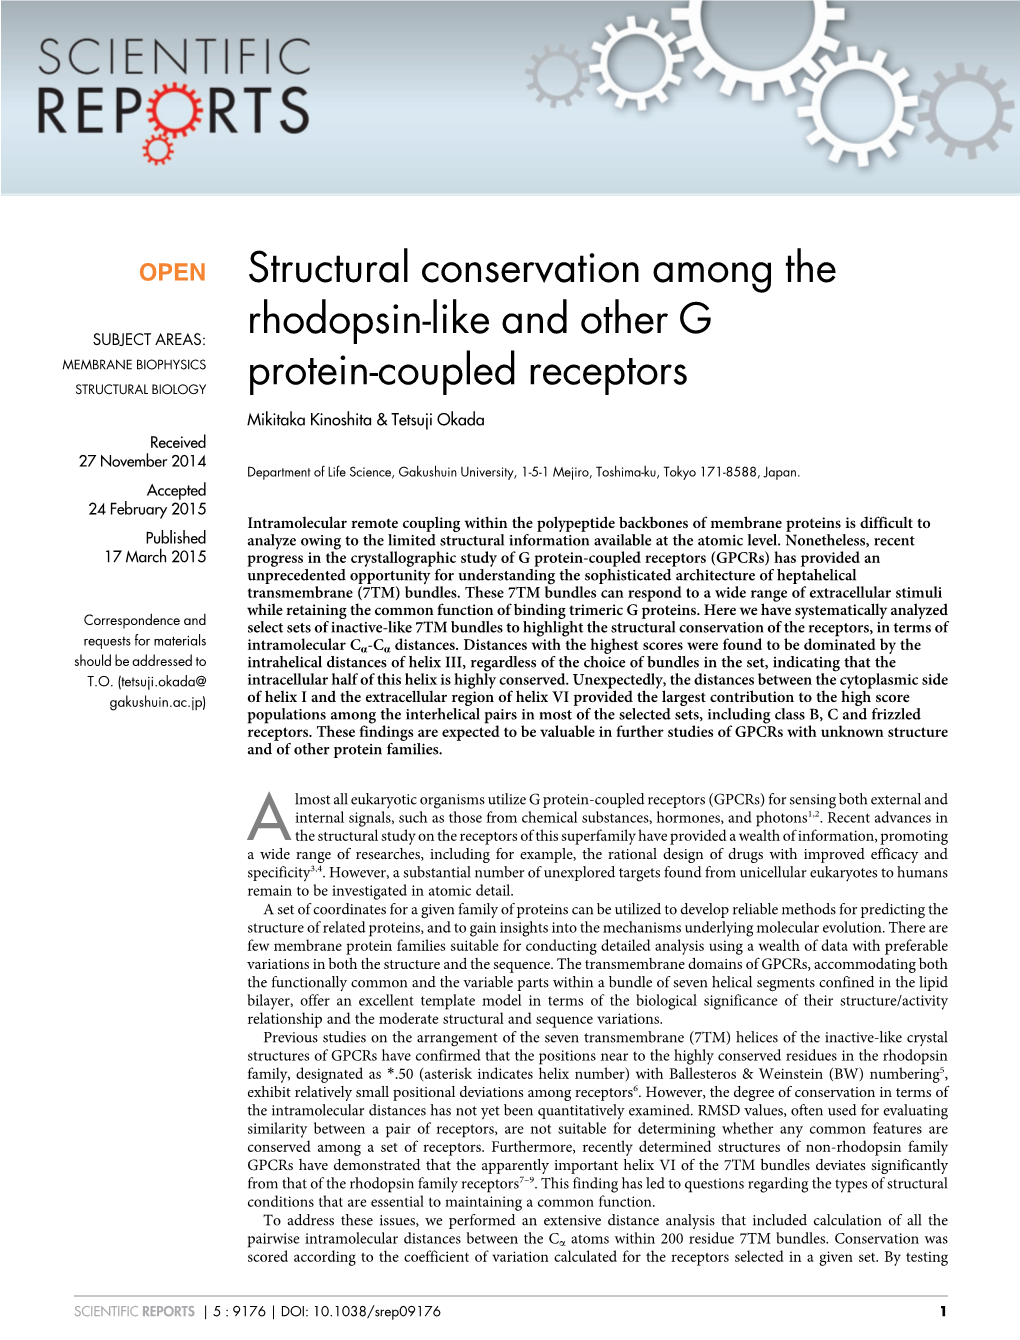 Structural Conservation Among the Rhodopsin-Like and Other G Protein-Coupled Receptors